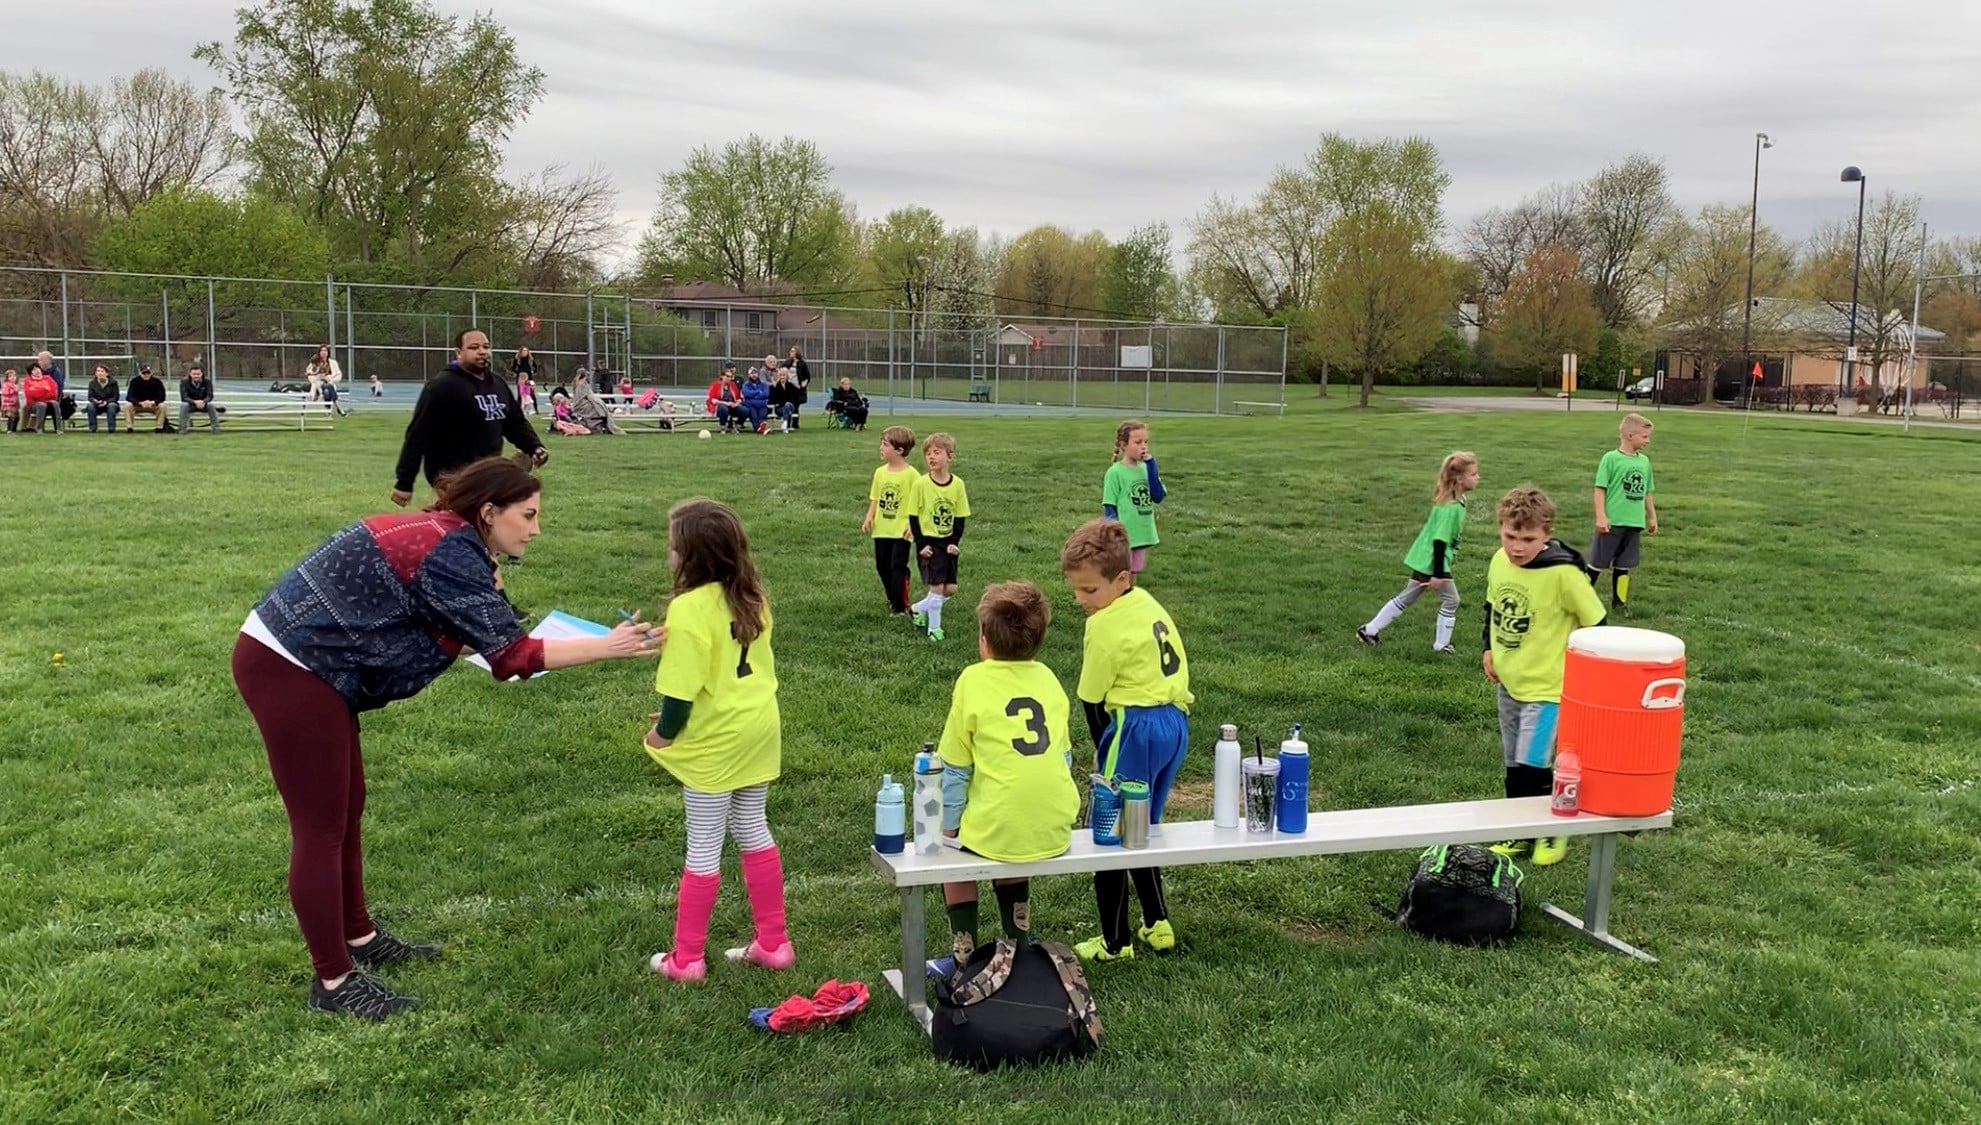 Jennie Carr (white woman in patterned sweater and maroon leggings) talking to a young girl in a yellow JCC soccer shirt, striped leggings and bright pink shin pads and cleats, as other children in yellow and green JCC soccer shirts take a water break.